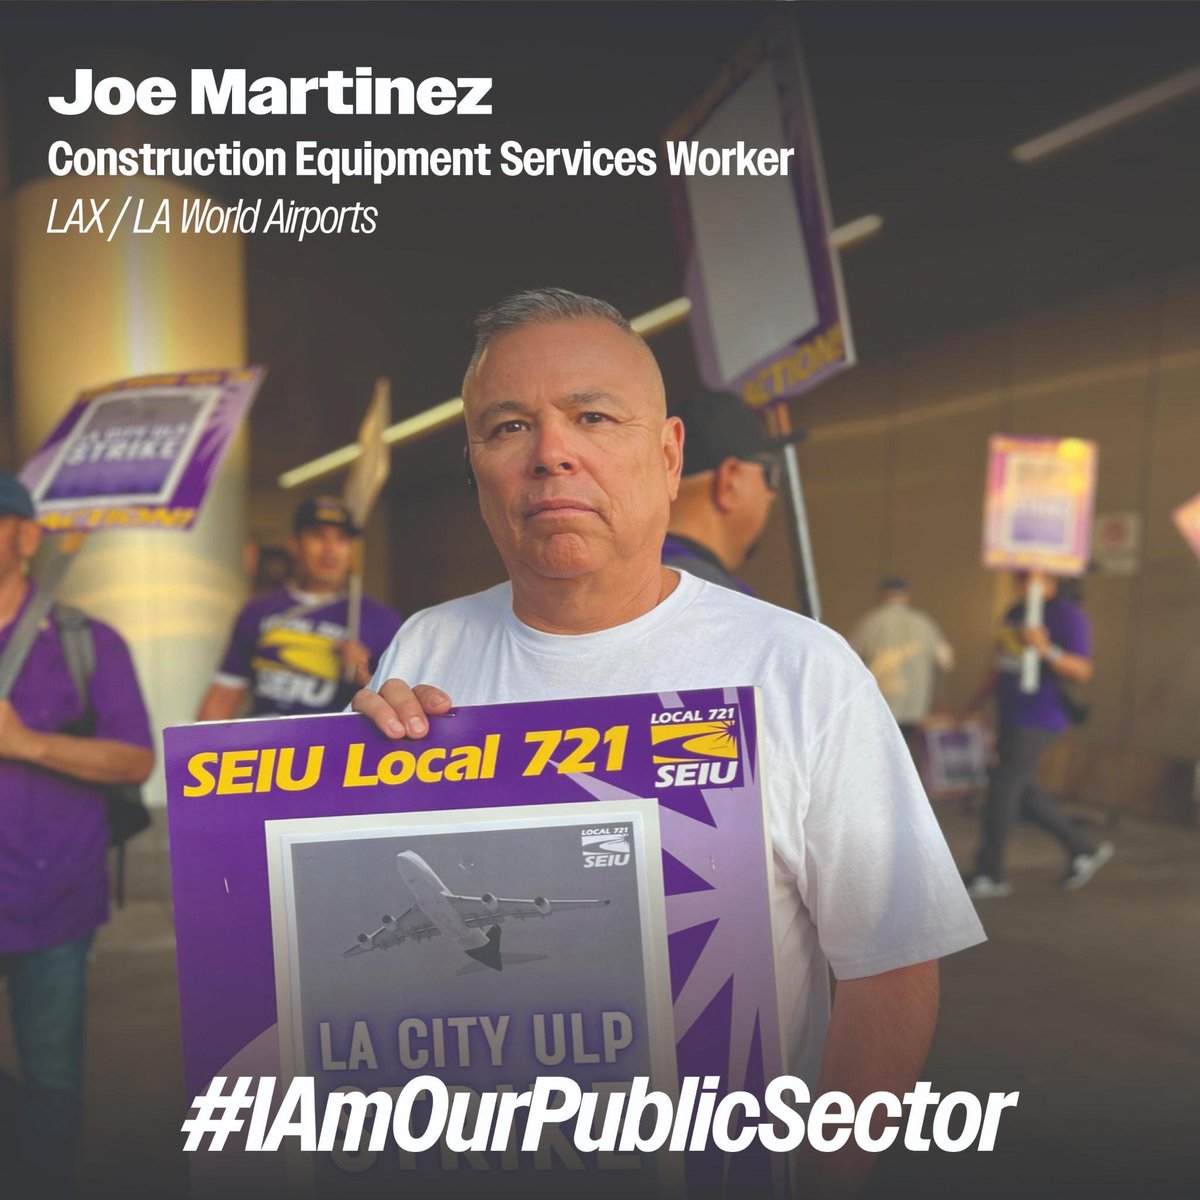 Public service providers like Joe Martinez are on the frontlines.

Ensuring there’s enough staffing & resources for them to do their job should be our priority.

Every LAX visitor, LA resident & person who calls CA home benefits from our public sector.

#PS #WeNeedOurPublicSector